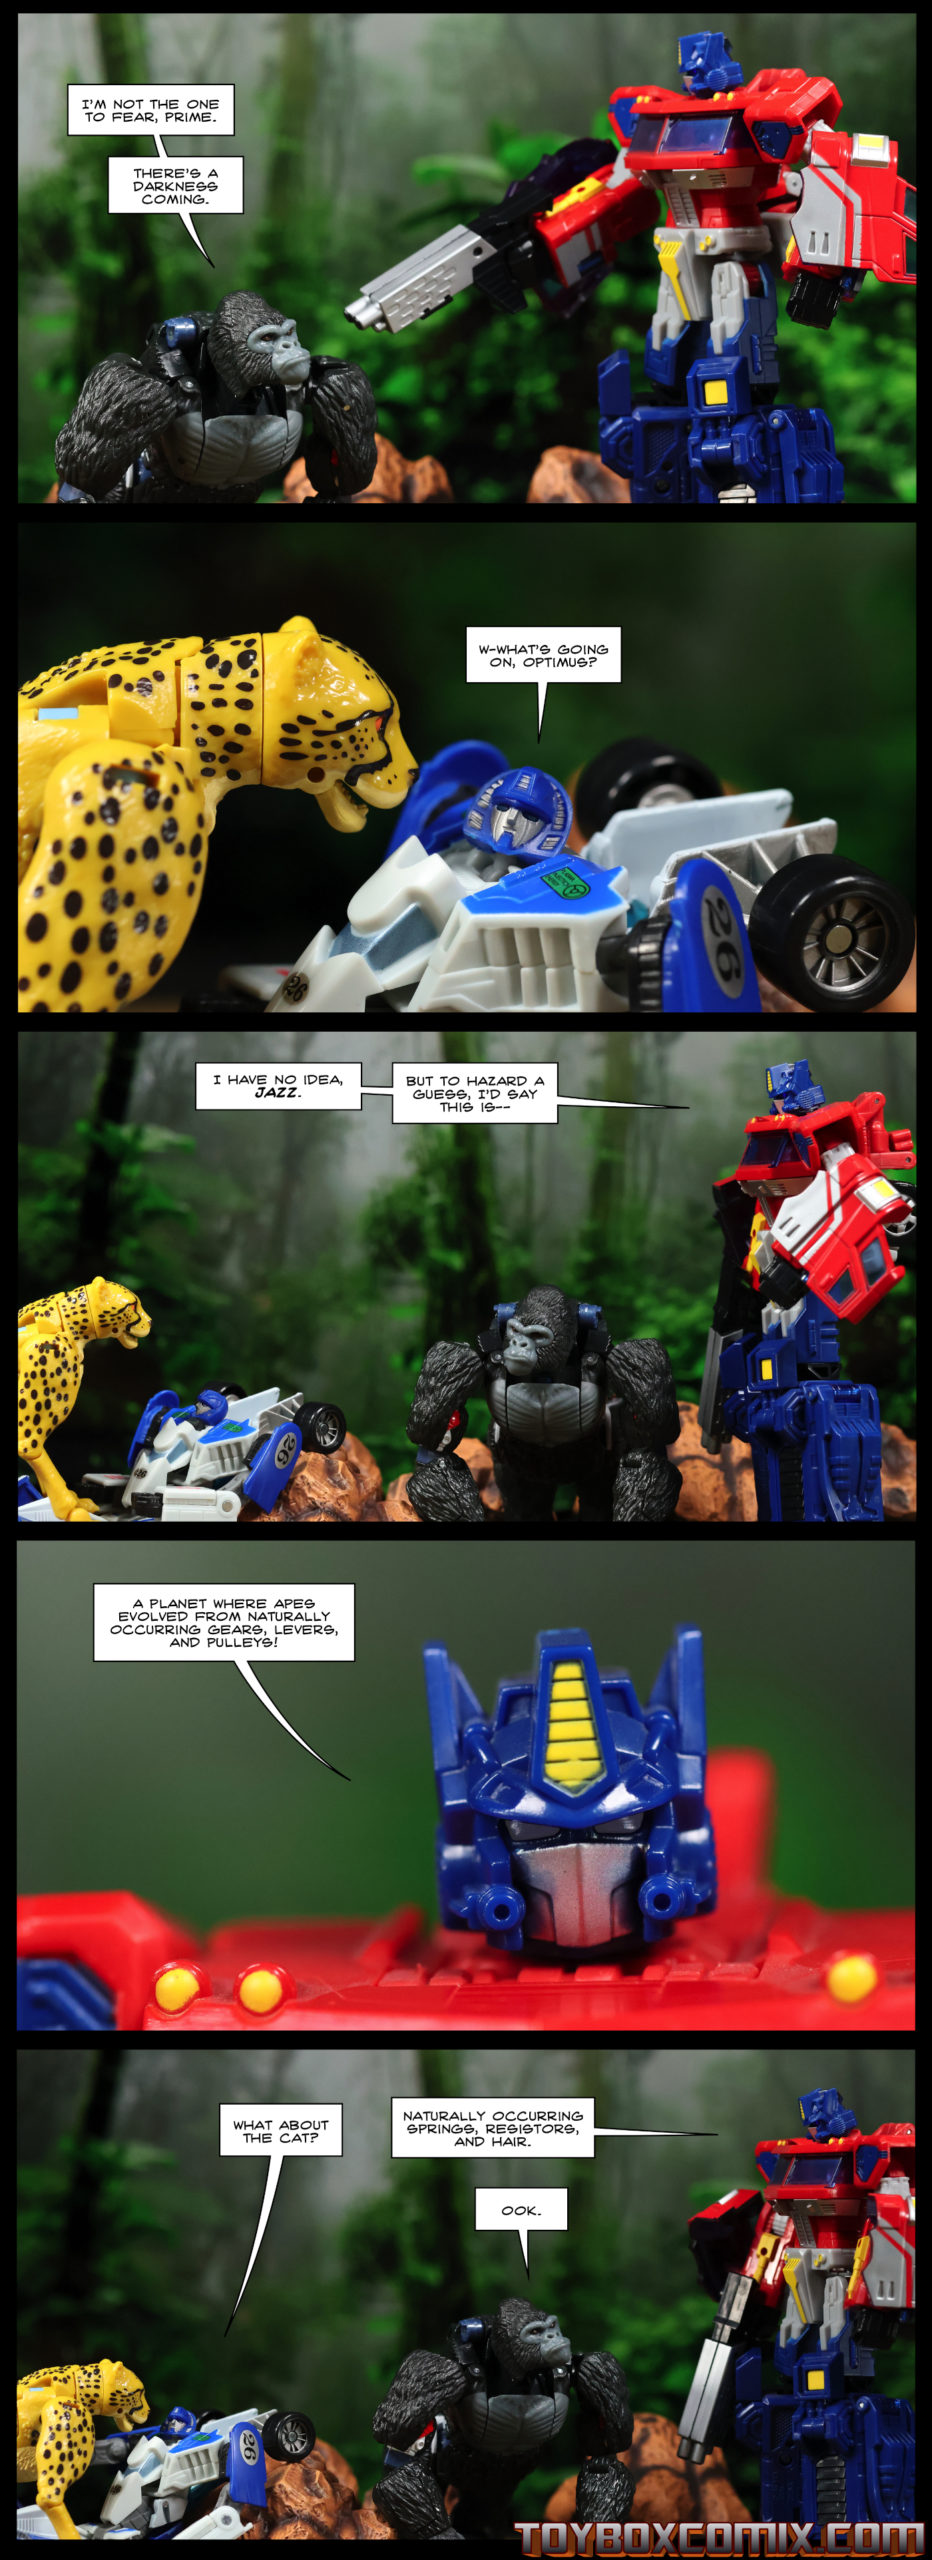 First panel: Optimus Prime points a gun at Optimus Primal. Primal: “I’m not the one to fear, Prime. There’s a darkness coming.” Second panel: Mirage is on his back with Cheetor on top of him. Mirage: “What’s going on, Optimus?” Third panel: Optimus Prime: “I have no idea, Jazz. But to hazard a guess, I’d say this is—” Fourth panel: Optimus Prime: “A planet where apes evolved from naturally occurring gears, levers, and pulleys!” Fifth panel: Mirage: “What about the cat?” Optimus Prime: “Naturally occurring springs, resistors, and hair.” Optimus Primal: “Ook.”